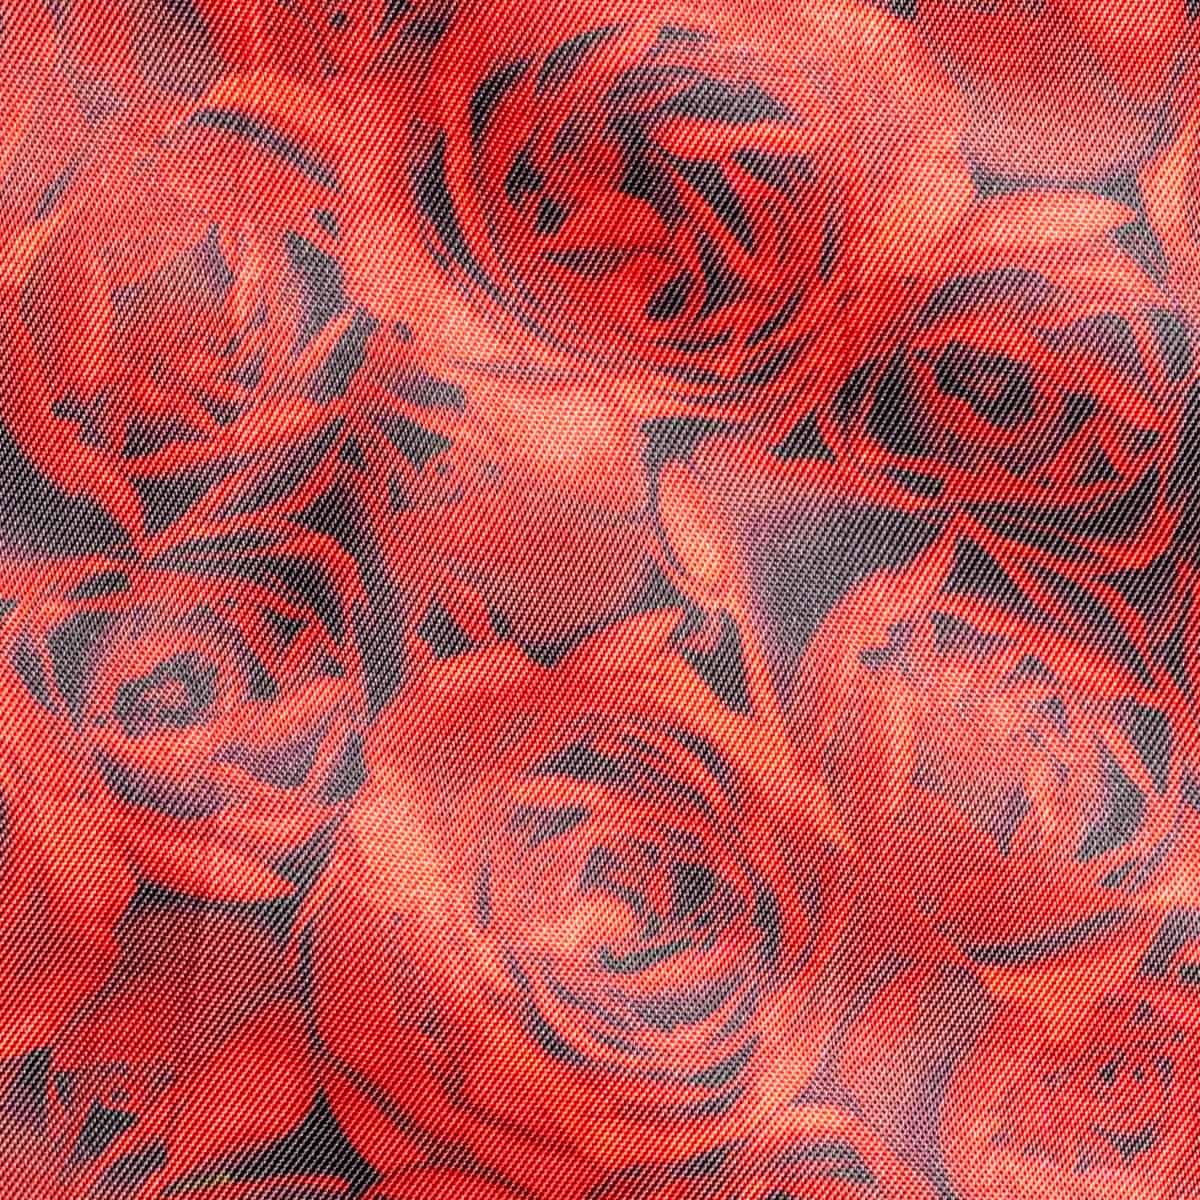 Red roses MTM lining